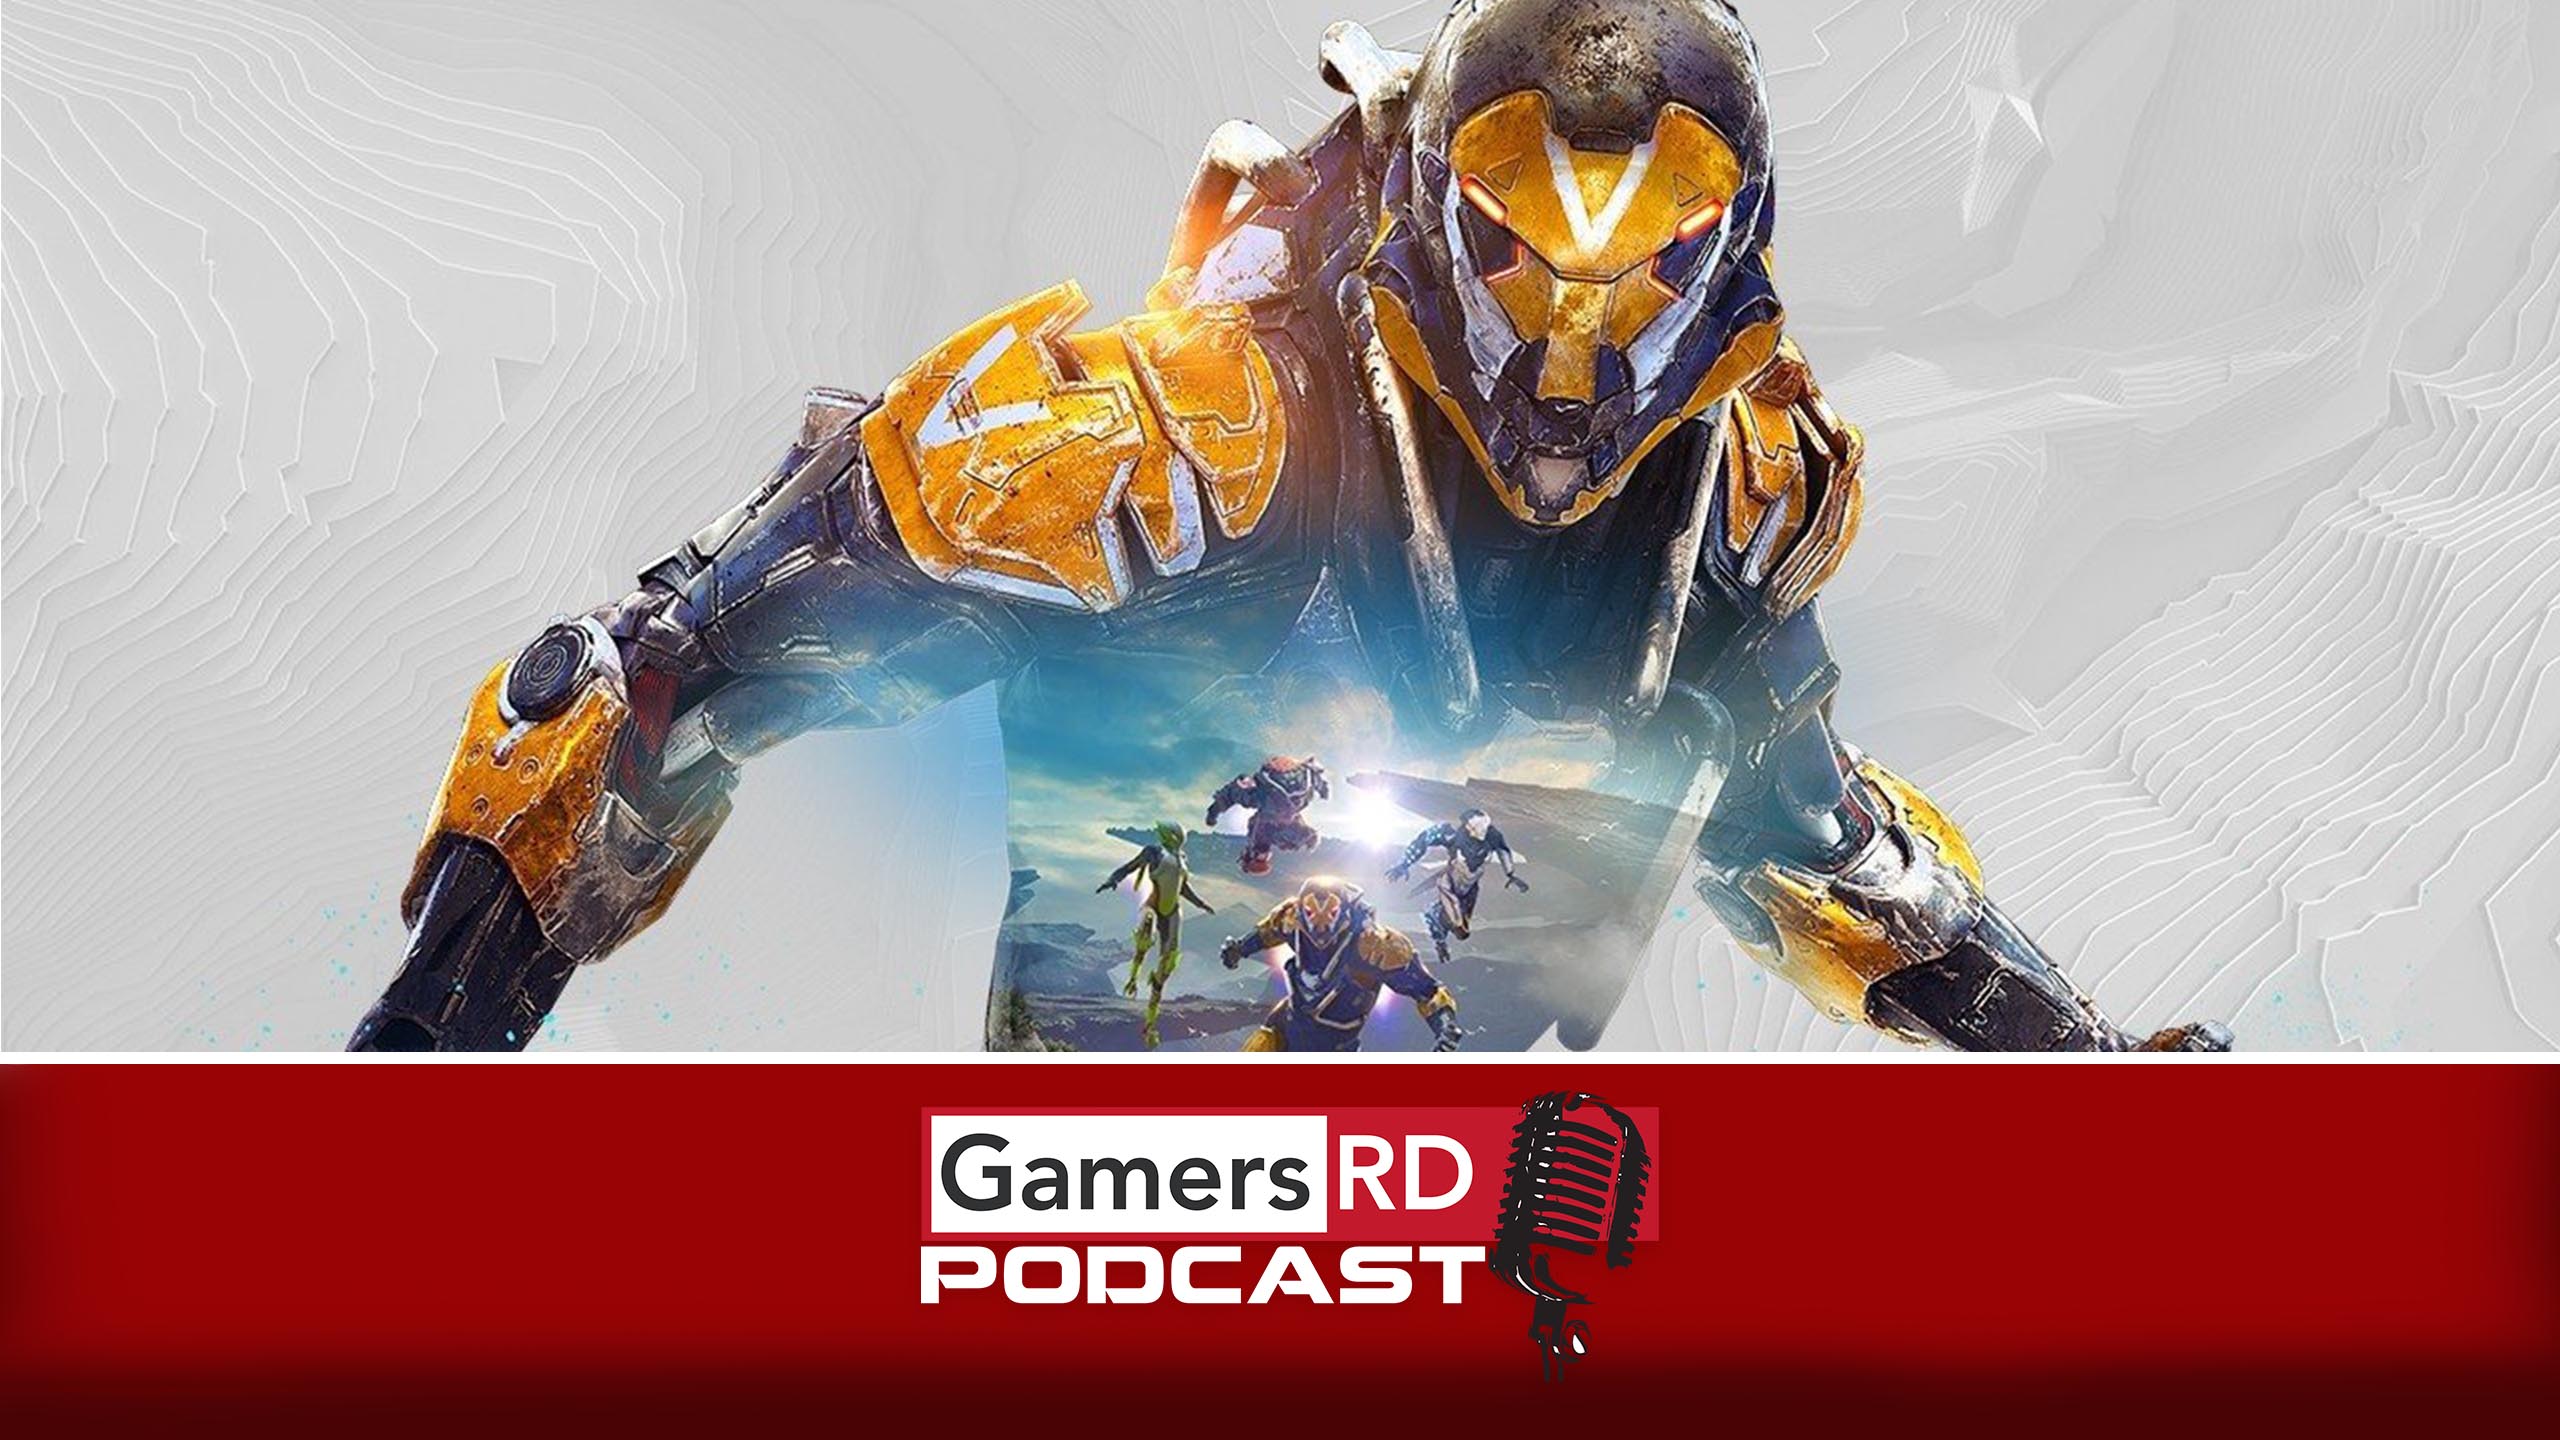 GamersRD Podcast #57 Anthem Review, PC, PS4, xbox One, Bioware, EA